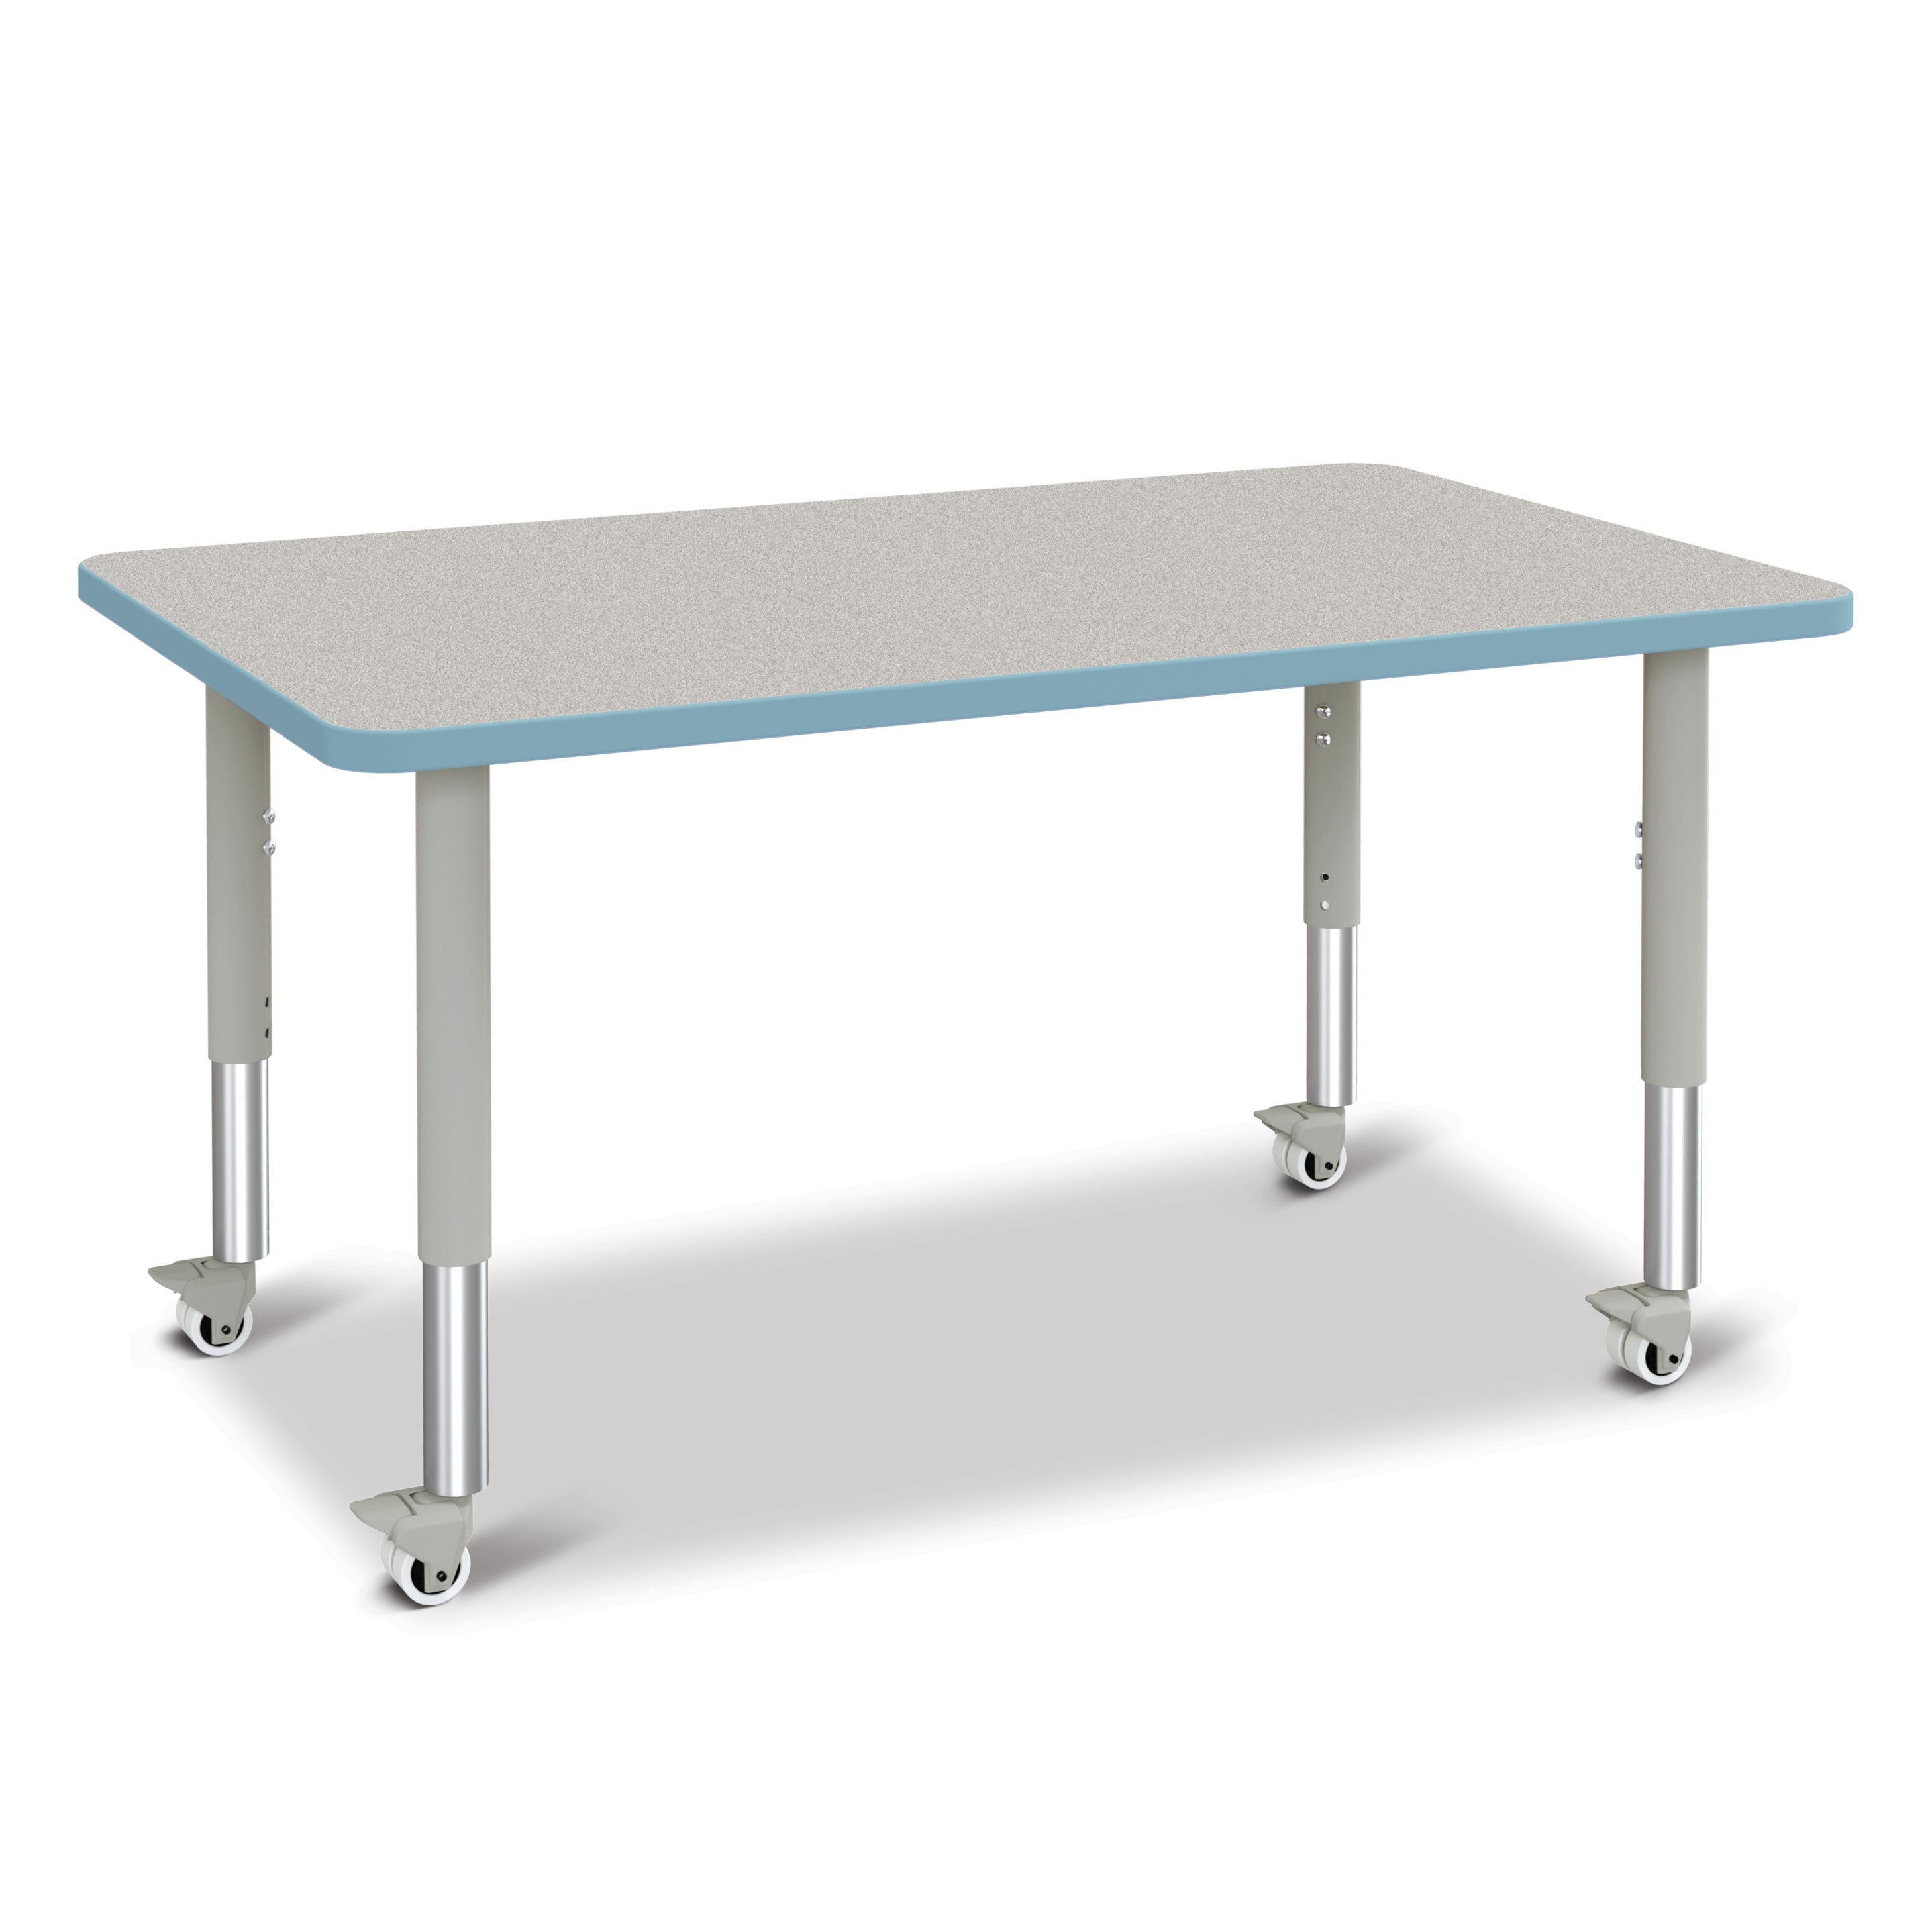 6473JCM131, Berries Rectangle Activity Table - 30" X 48", Mobile - Freckled Gray/Coastal Blue/Gray